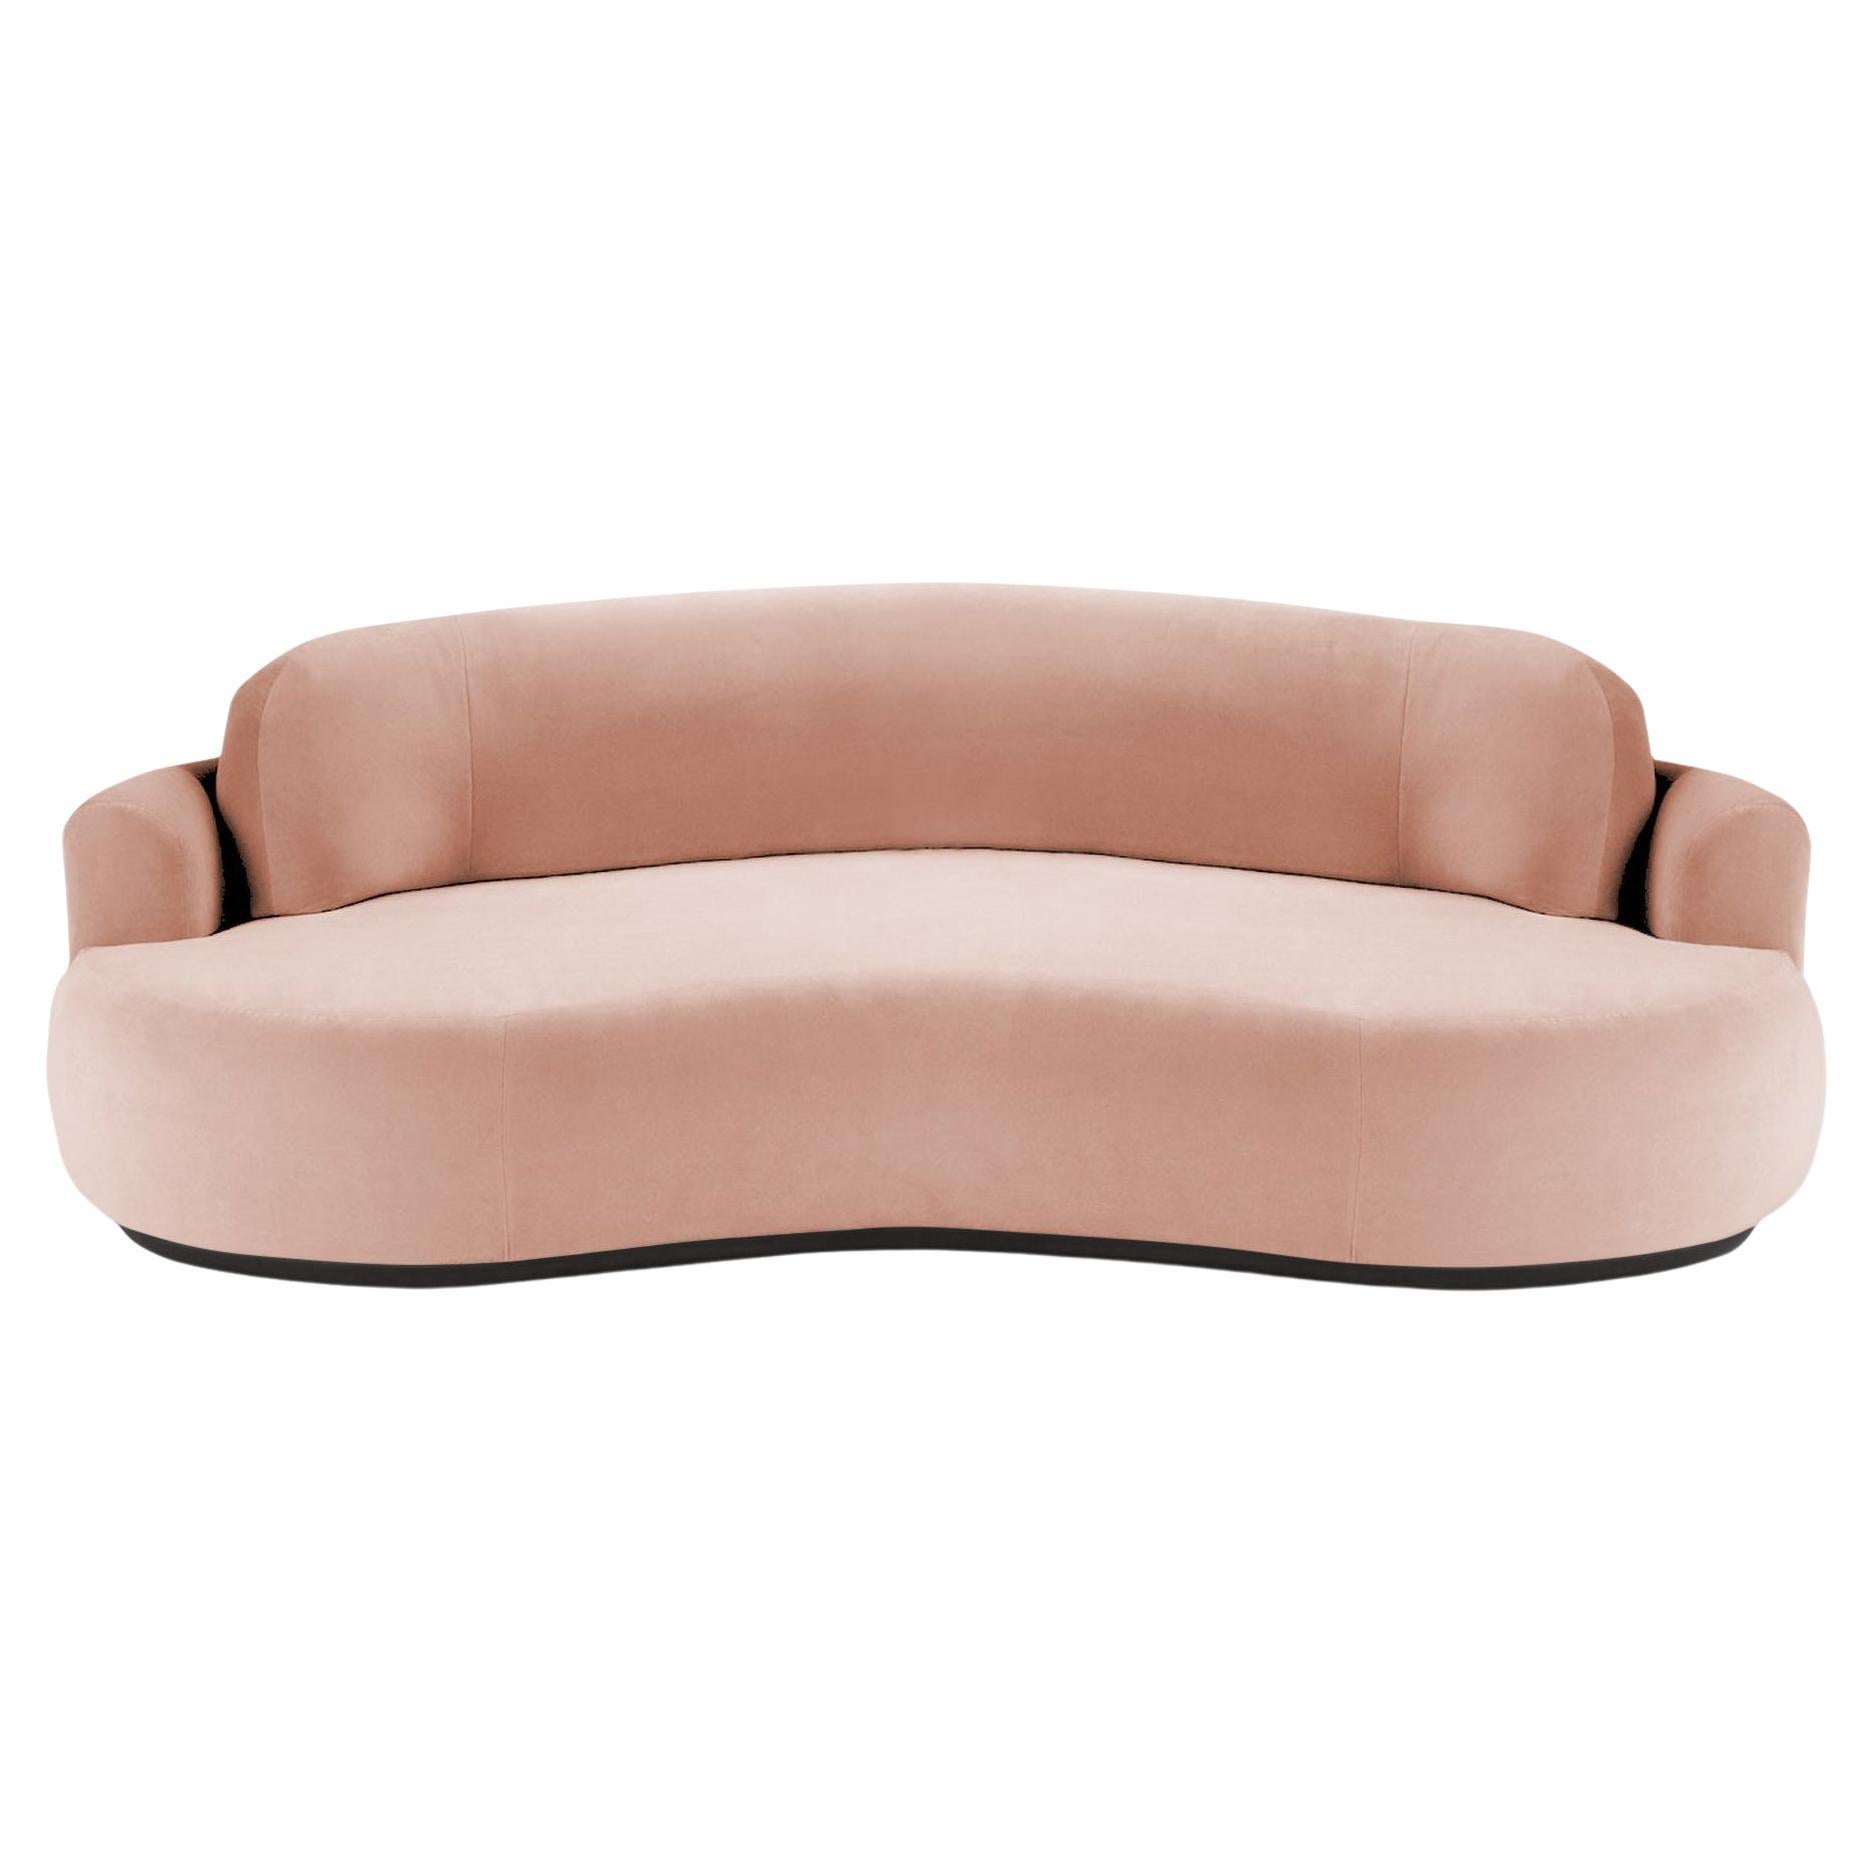 Naked Round Sofa, Large with Beech Ash-056-5 and Vigo Blossom For Sale